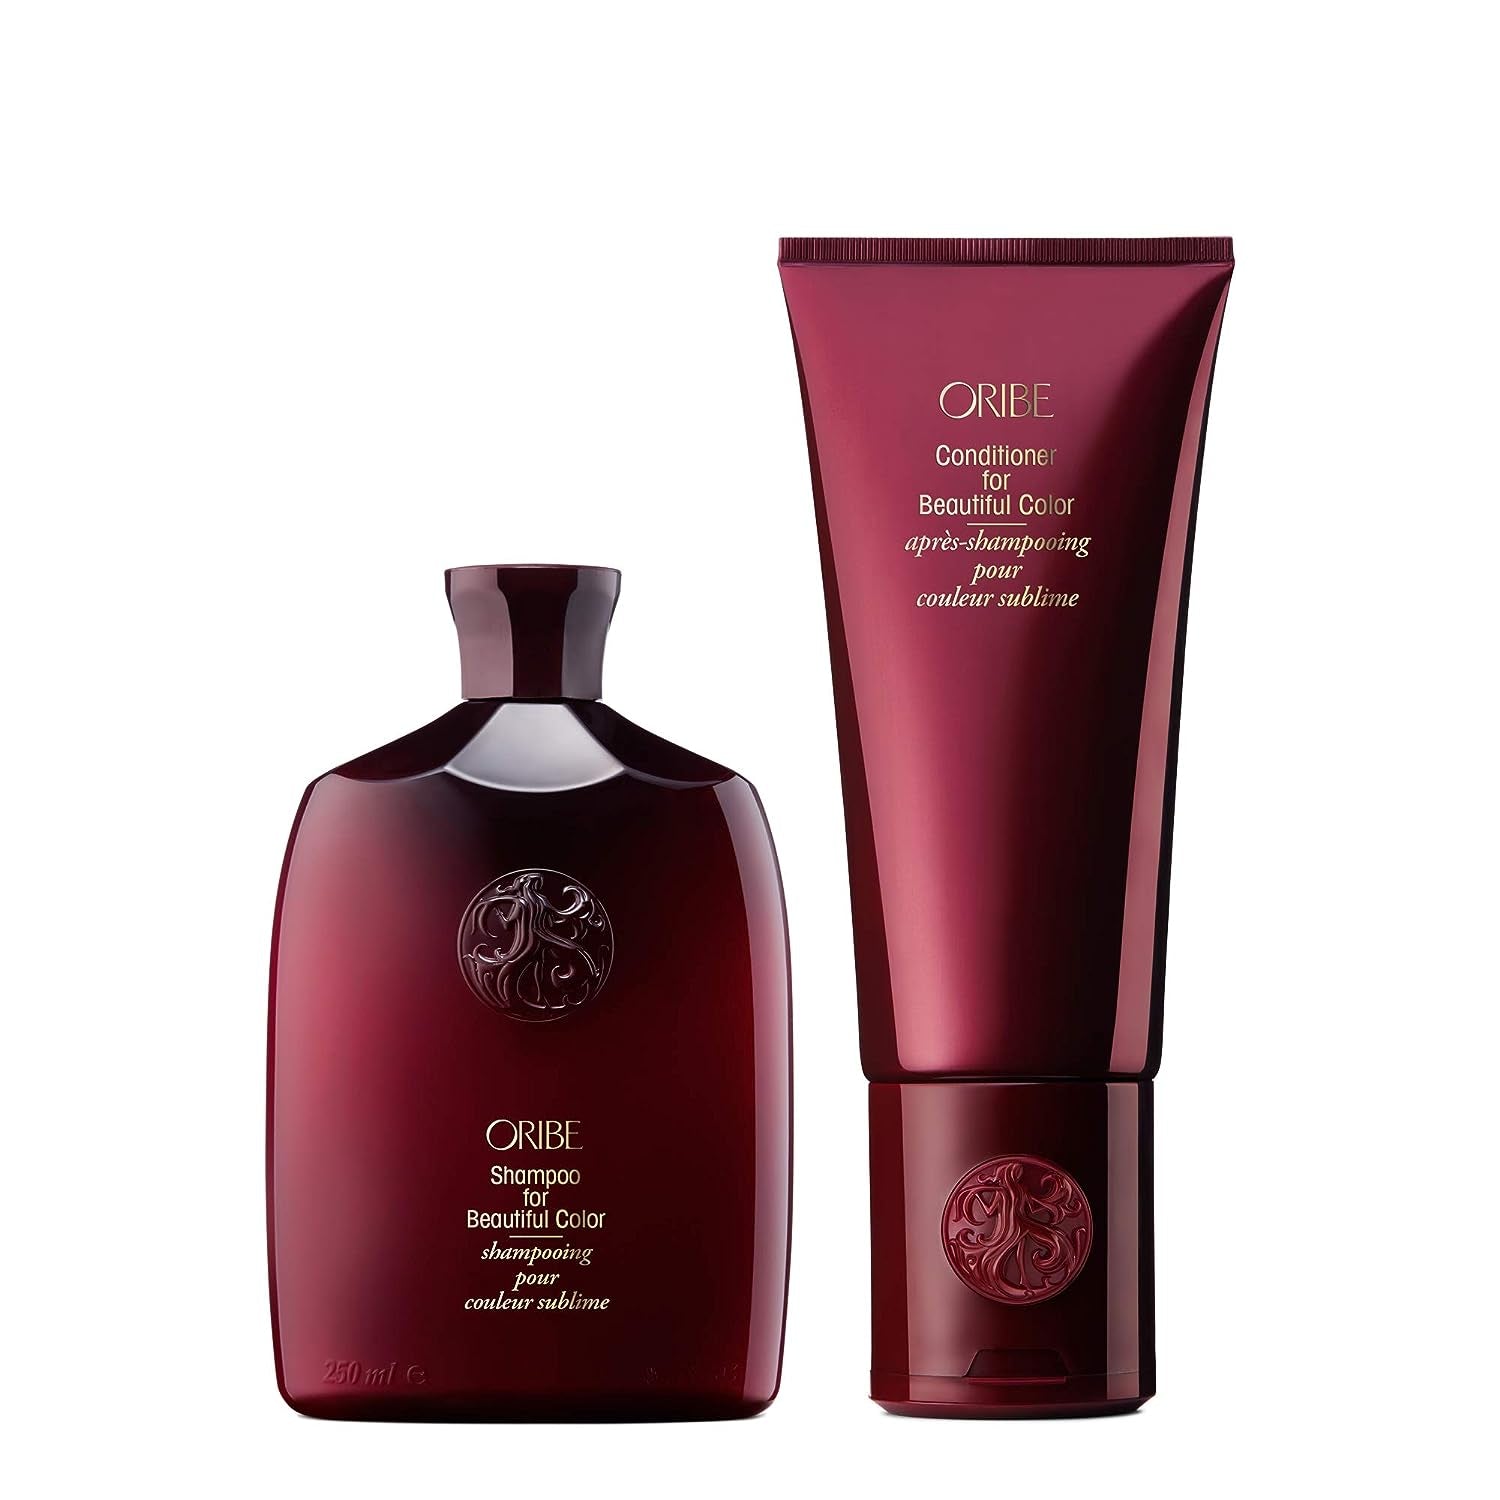 Oribe Shampoo and Conditioner for Beautiful Color Bundle